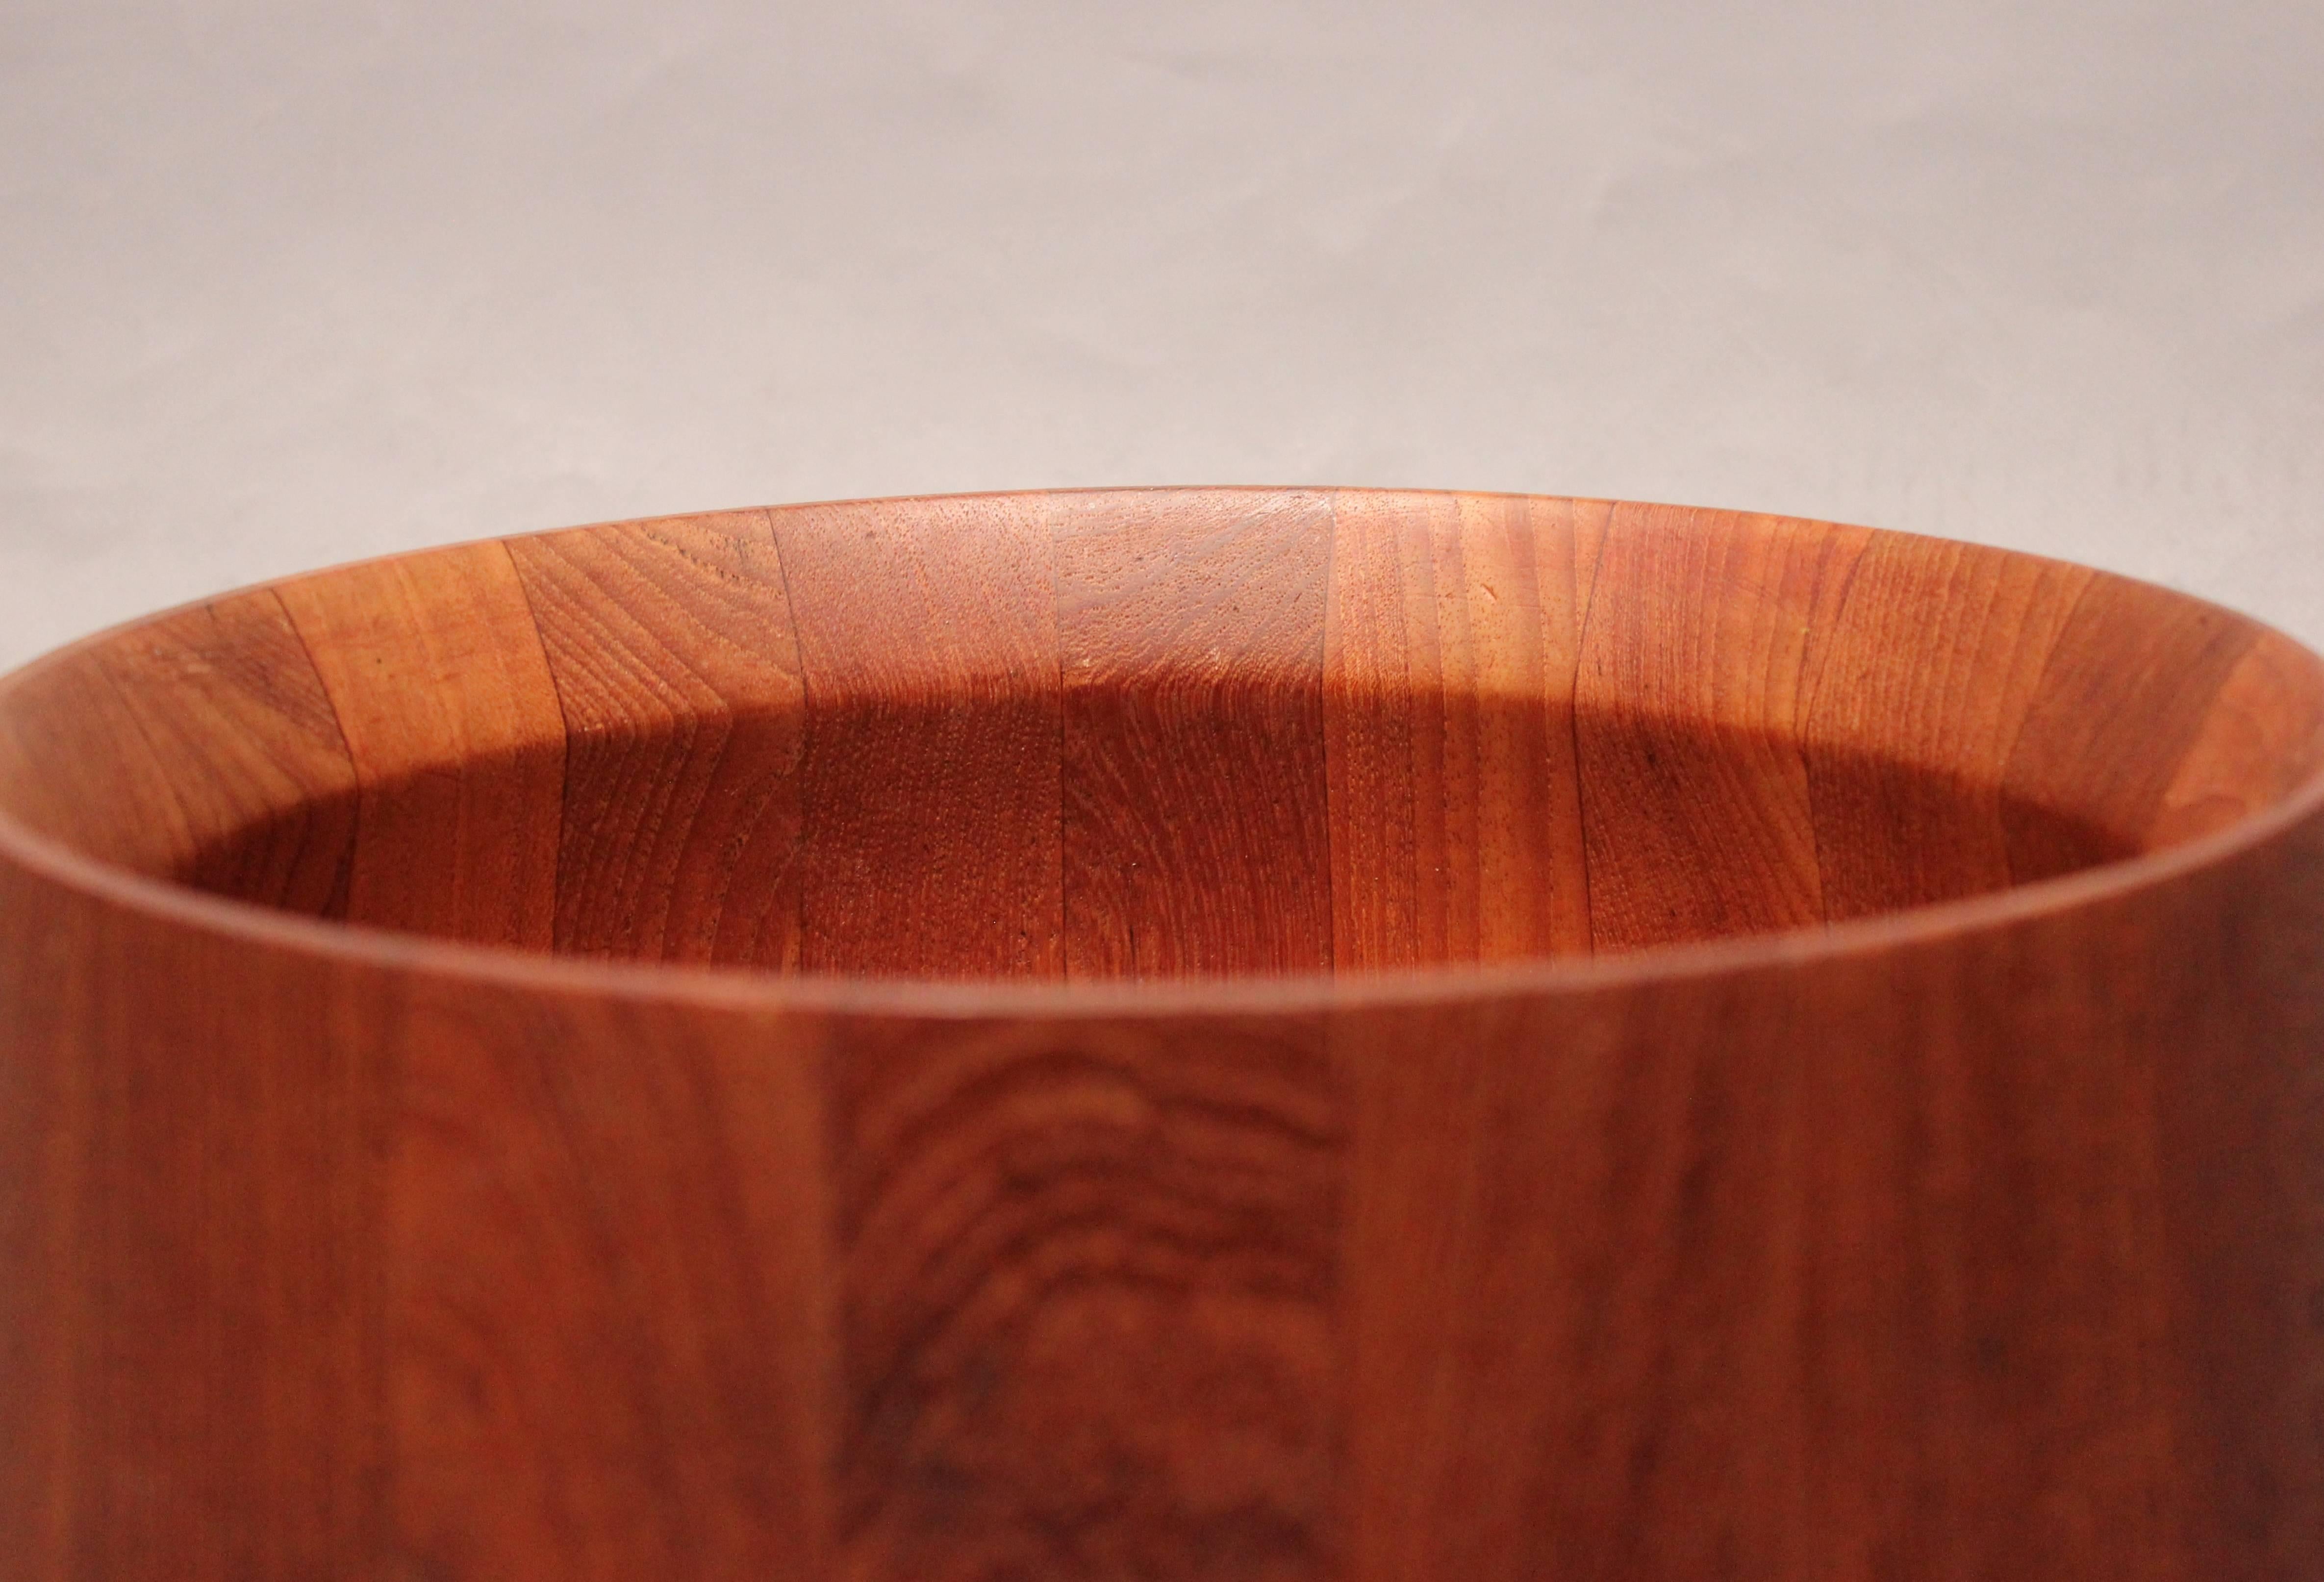 Bowl in teak by Jens Harald Quistgaard, Danish design from the 1960s. The bowl is in great vintage condition.